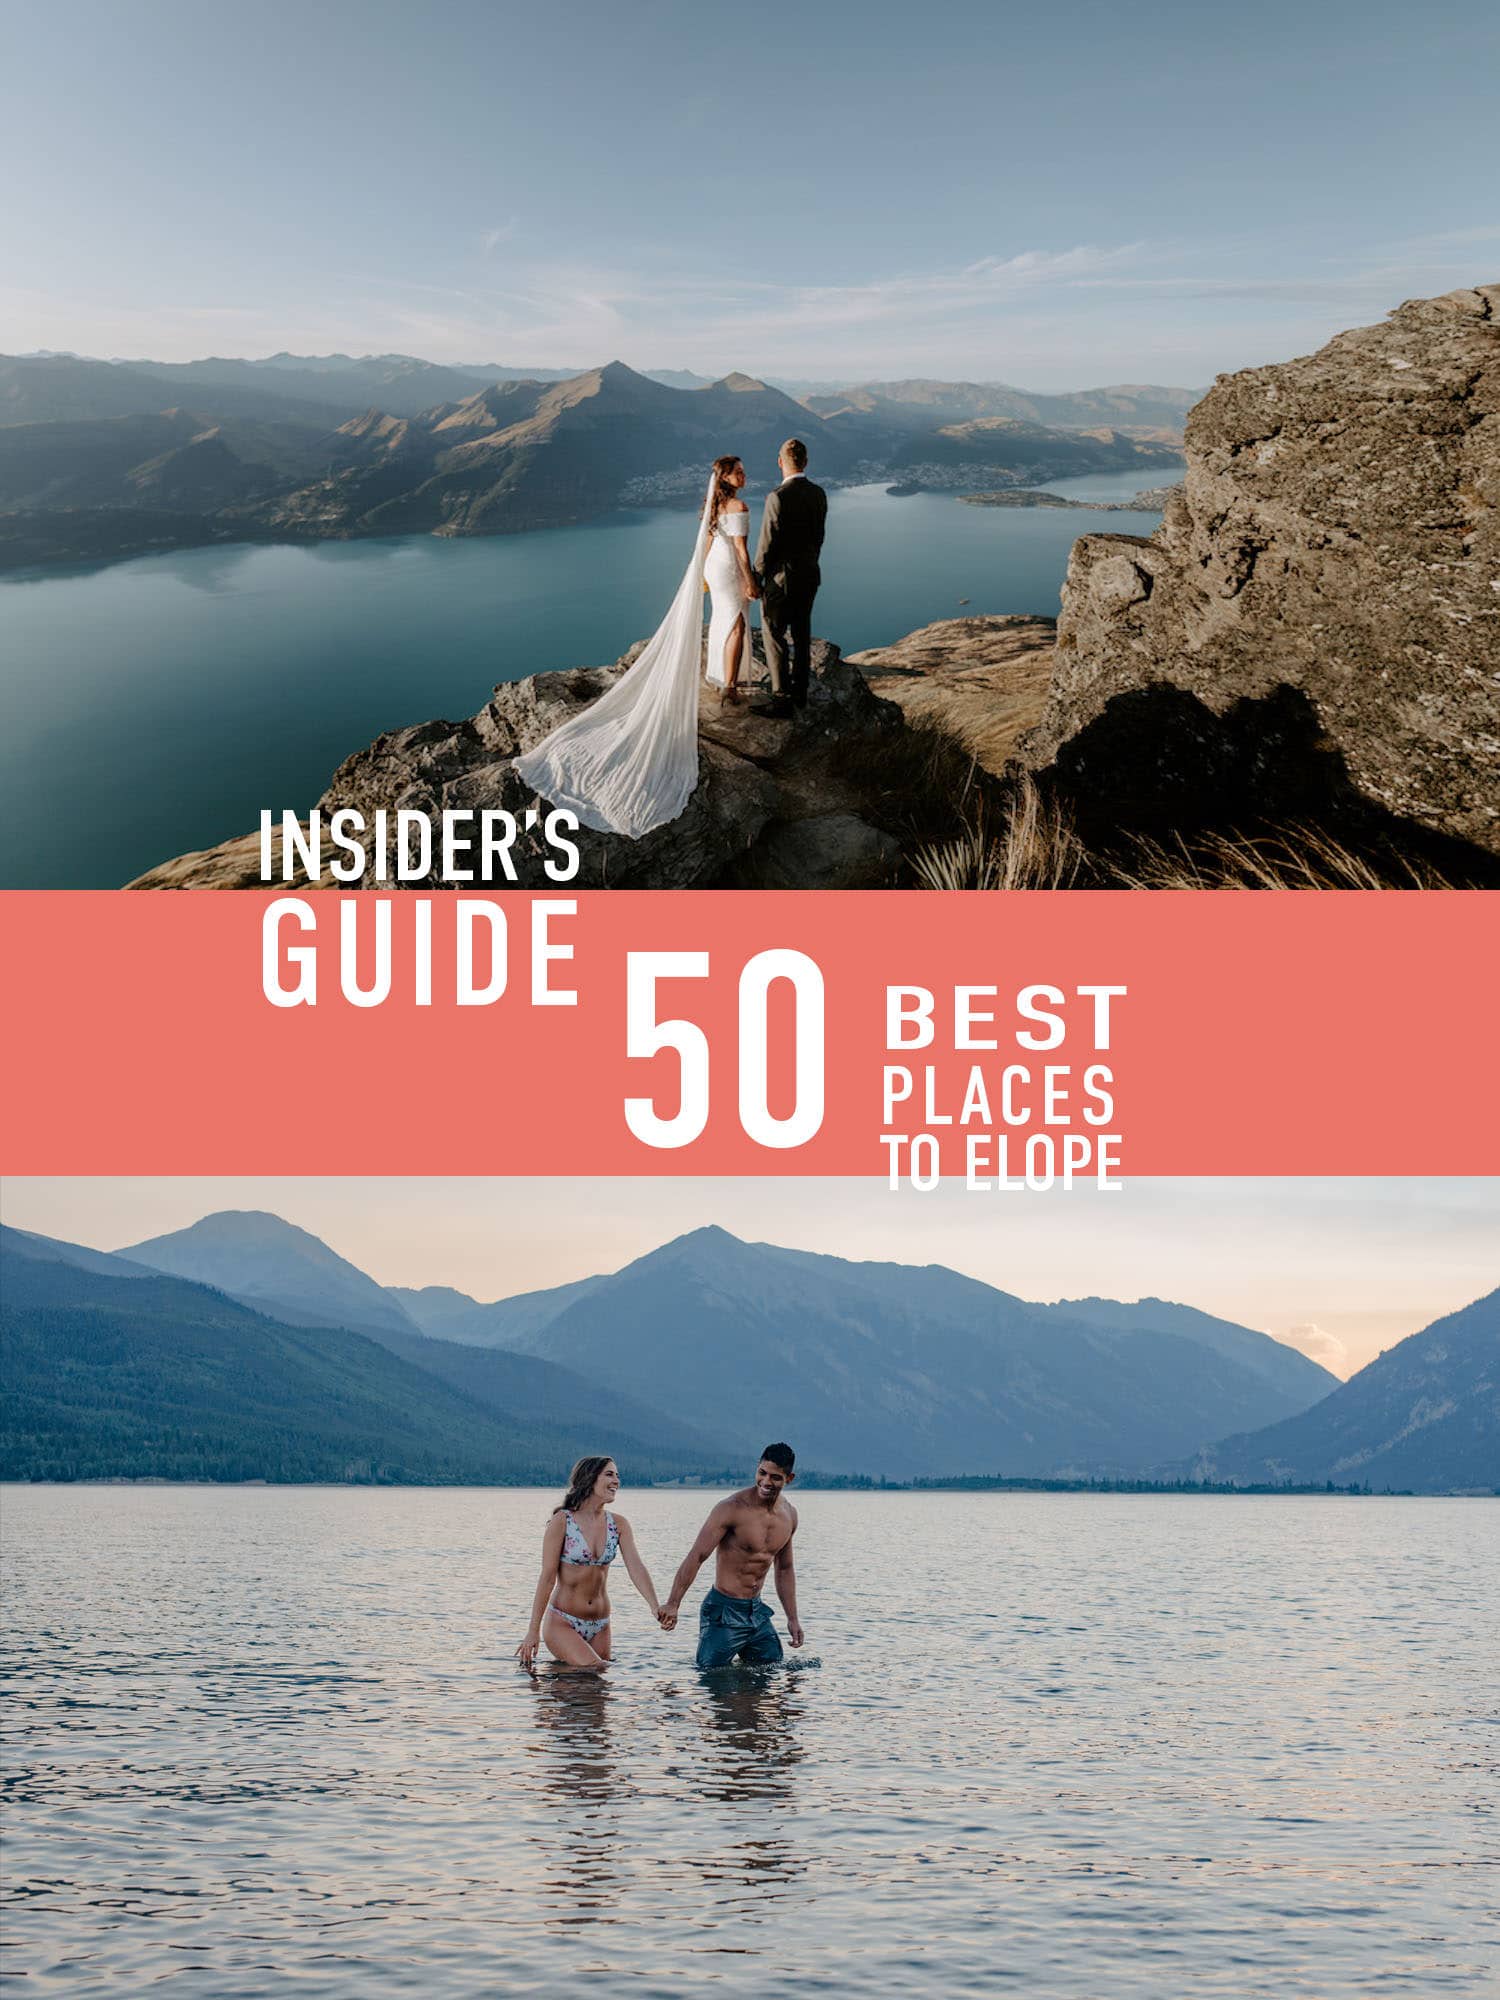 top image wedding couple standing on a rock over looking an alpine lake, text " Insiders guide 50 best places to elope", second image couple in alpine lake swimming